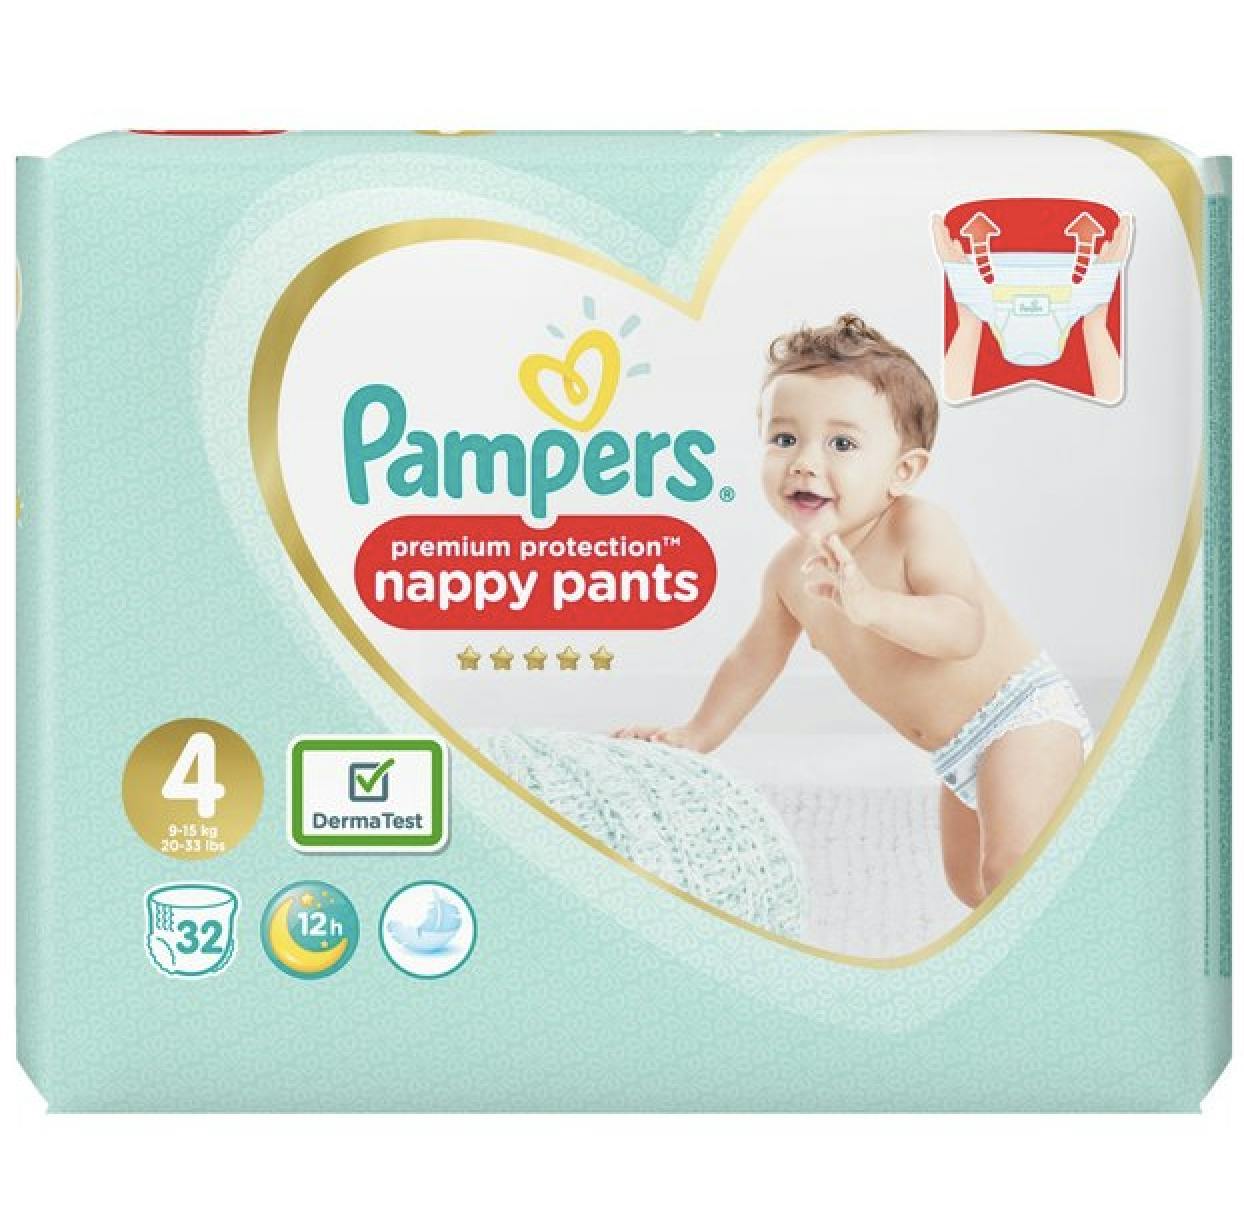 Buy Pampers Premium Care Diaper Pants - New Baby, Up to 5 kg, Lotion with  Aloe Vera Online at Best Price of Rs 545.22 - bigbasket